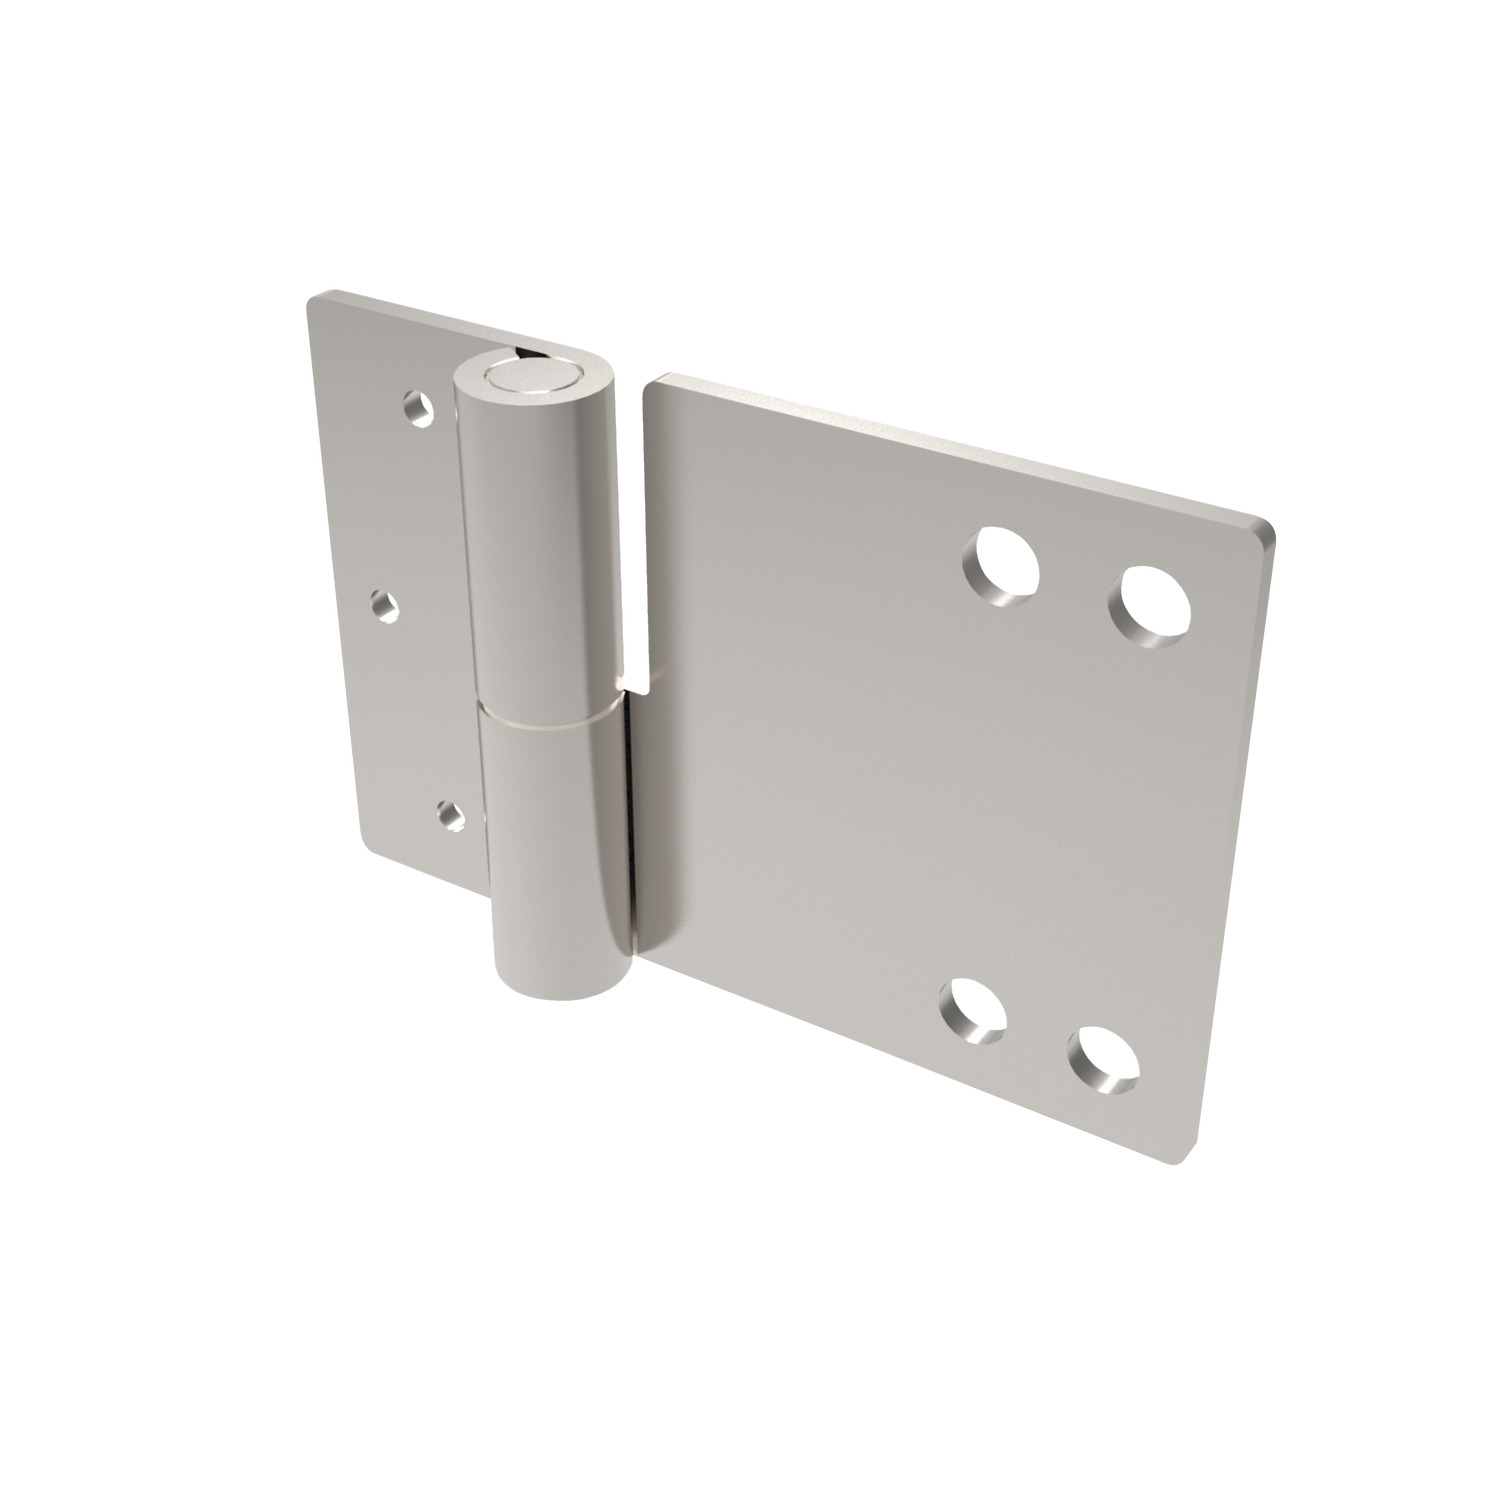 S2316.AW0010 Lift-Off Hinges off set - screw mount - s/s